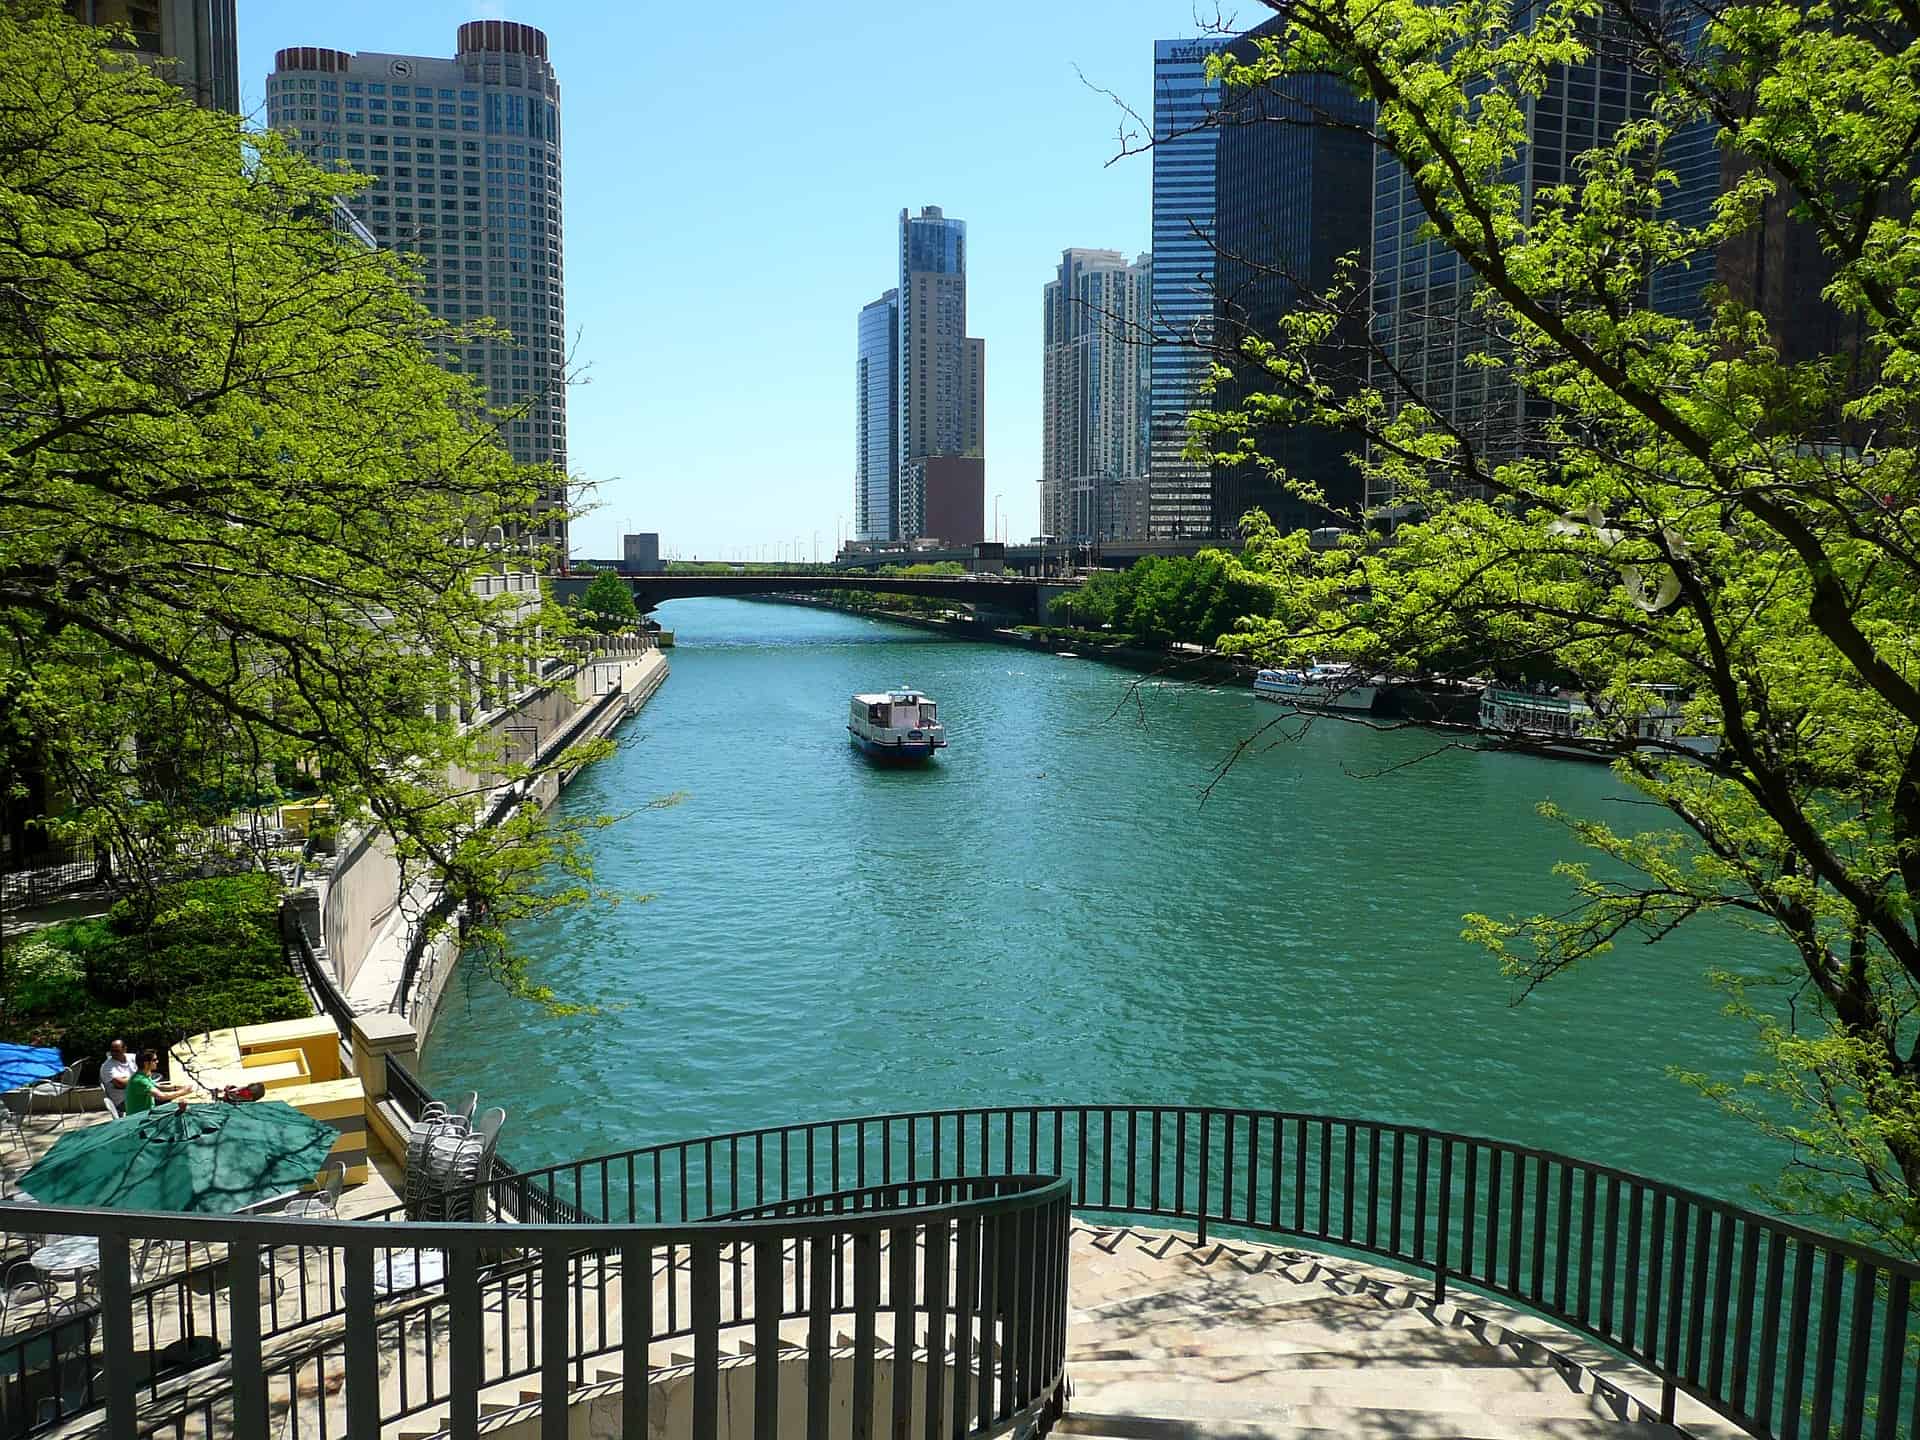 Best things to do in Chicago Illinois - Michael Sparrow - Chicago River dyed green for St Patricks Day by Brigitte Werner on Pixabay